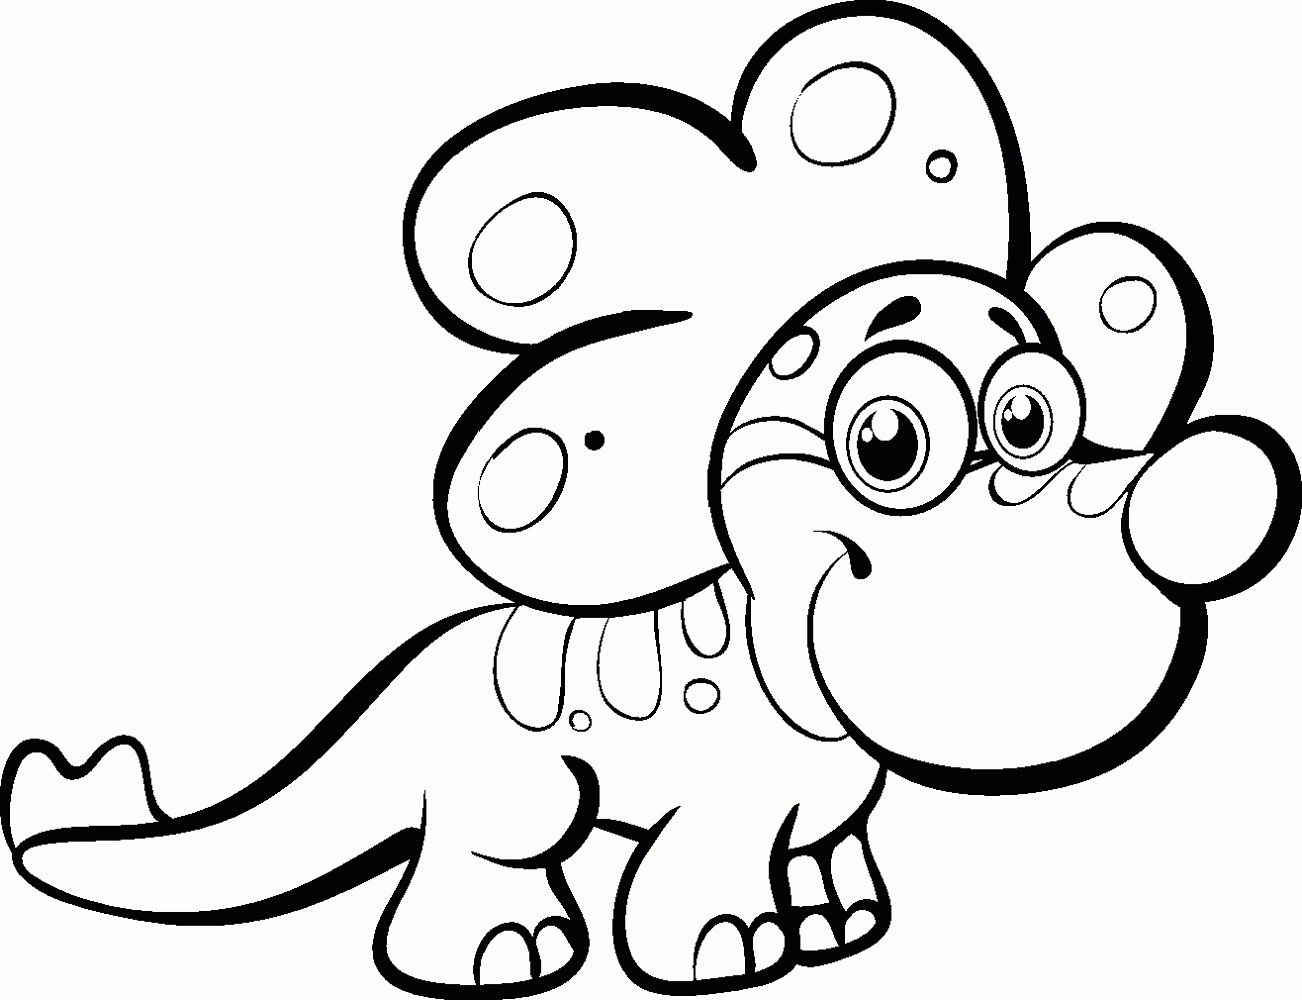 Baby Dinosaur Coloring Pages for Preschoolers Activity